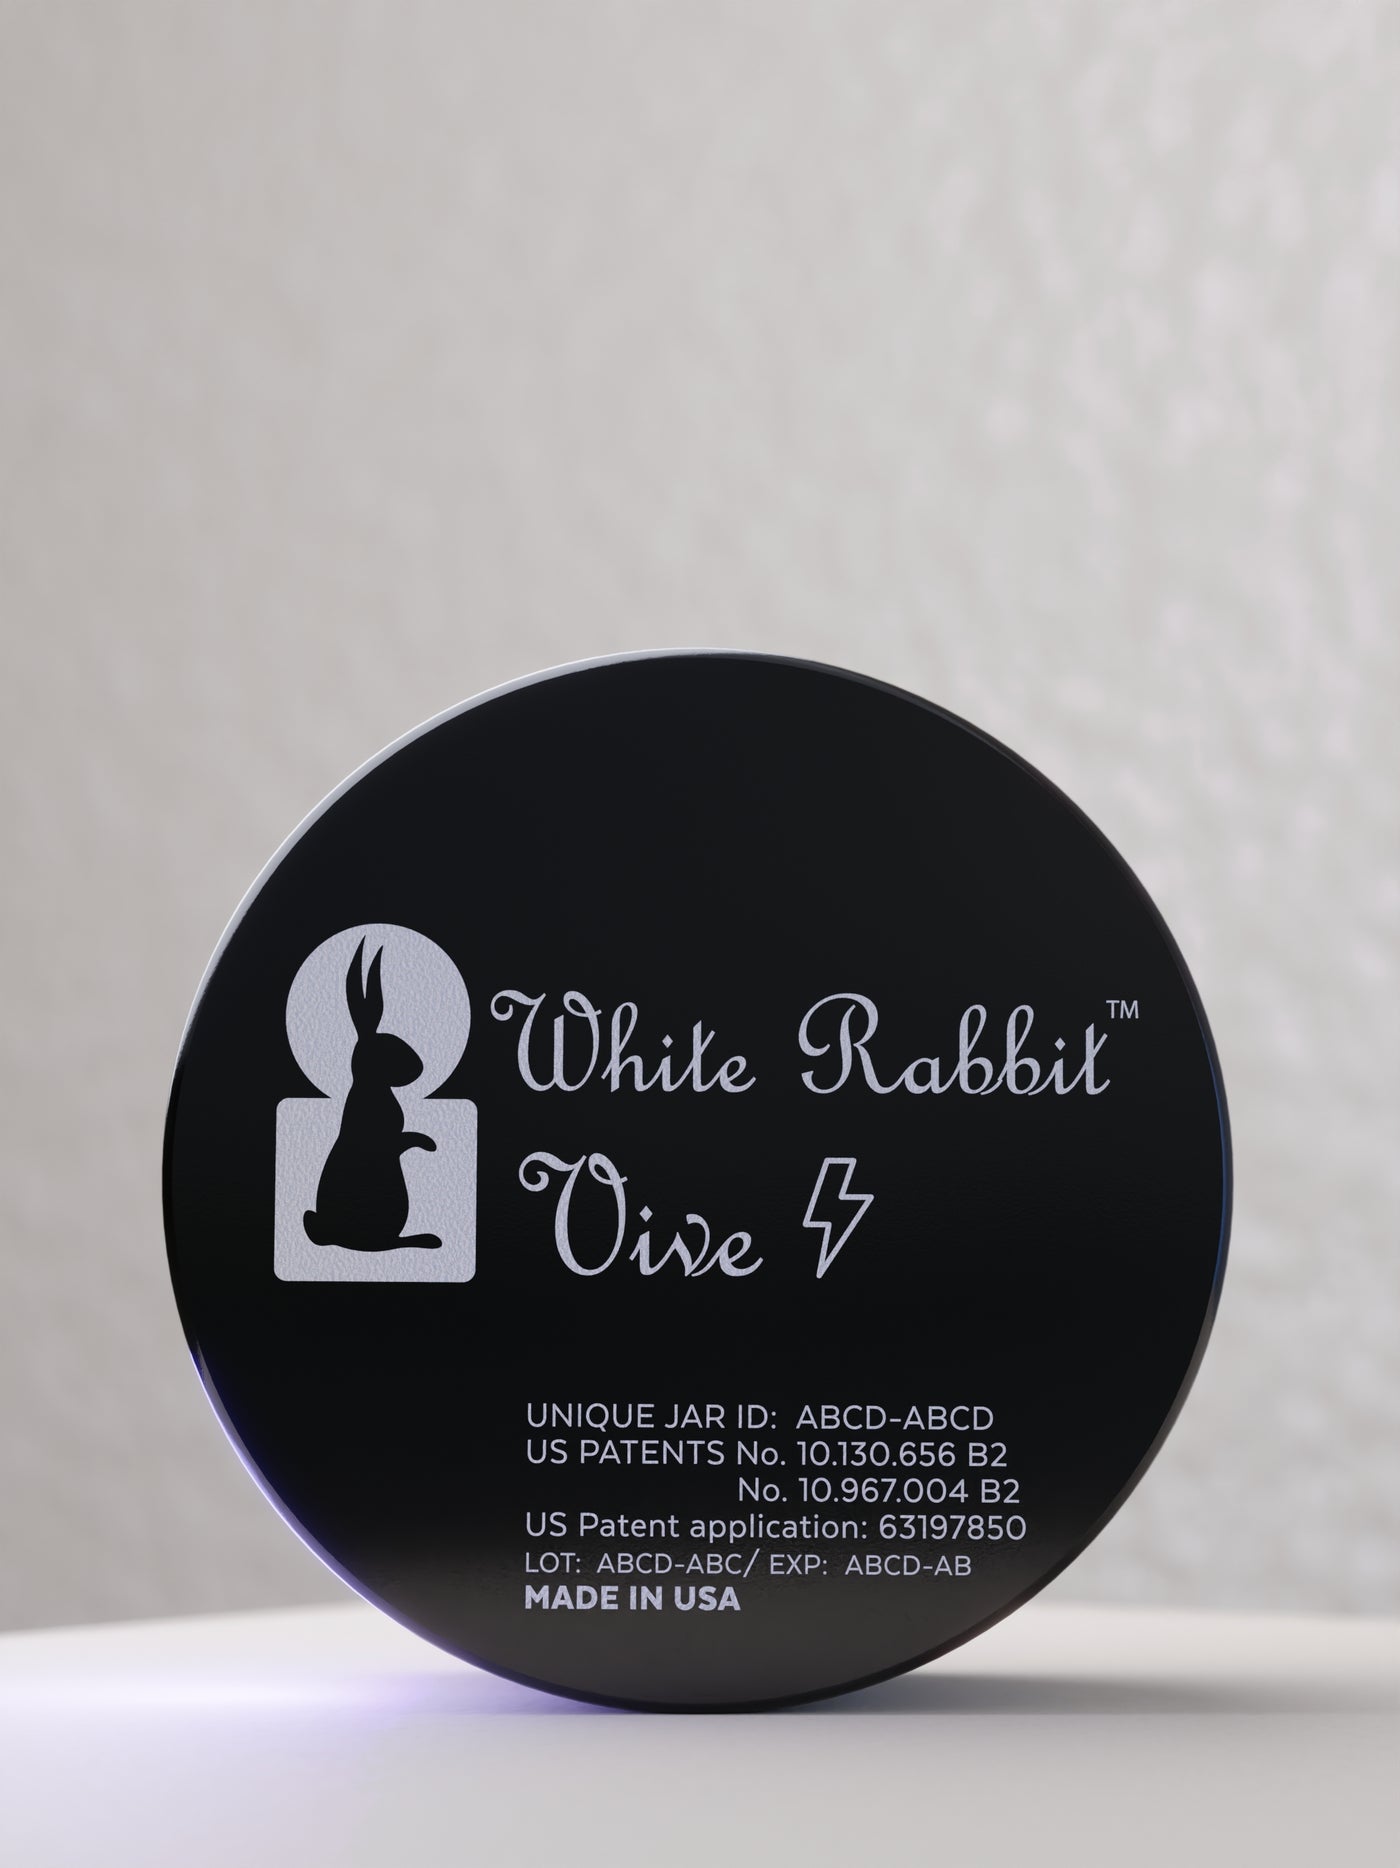 White Rabbit Vive. Elevate Your Energy, Ignite Your Day.